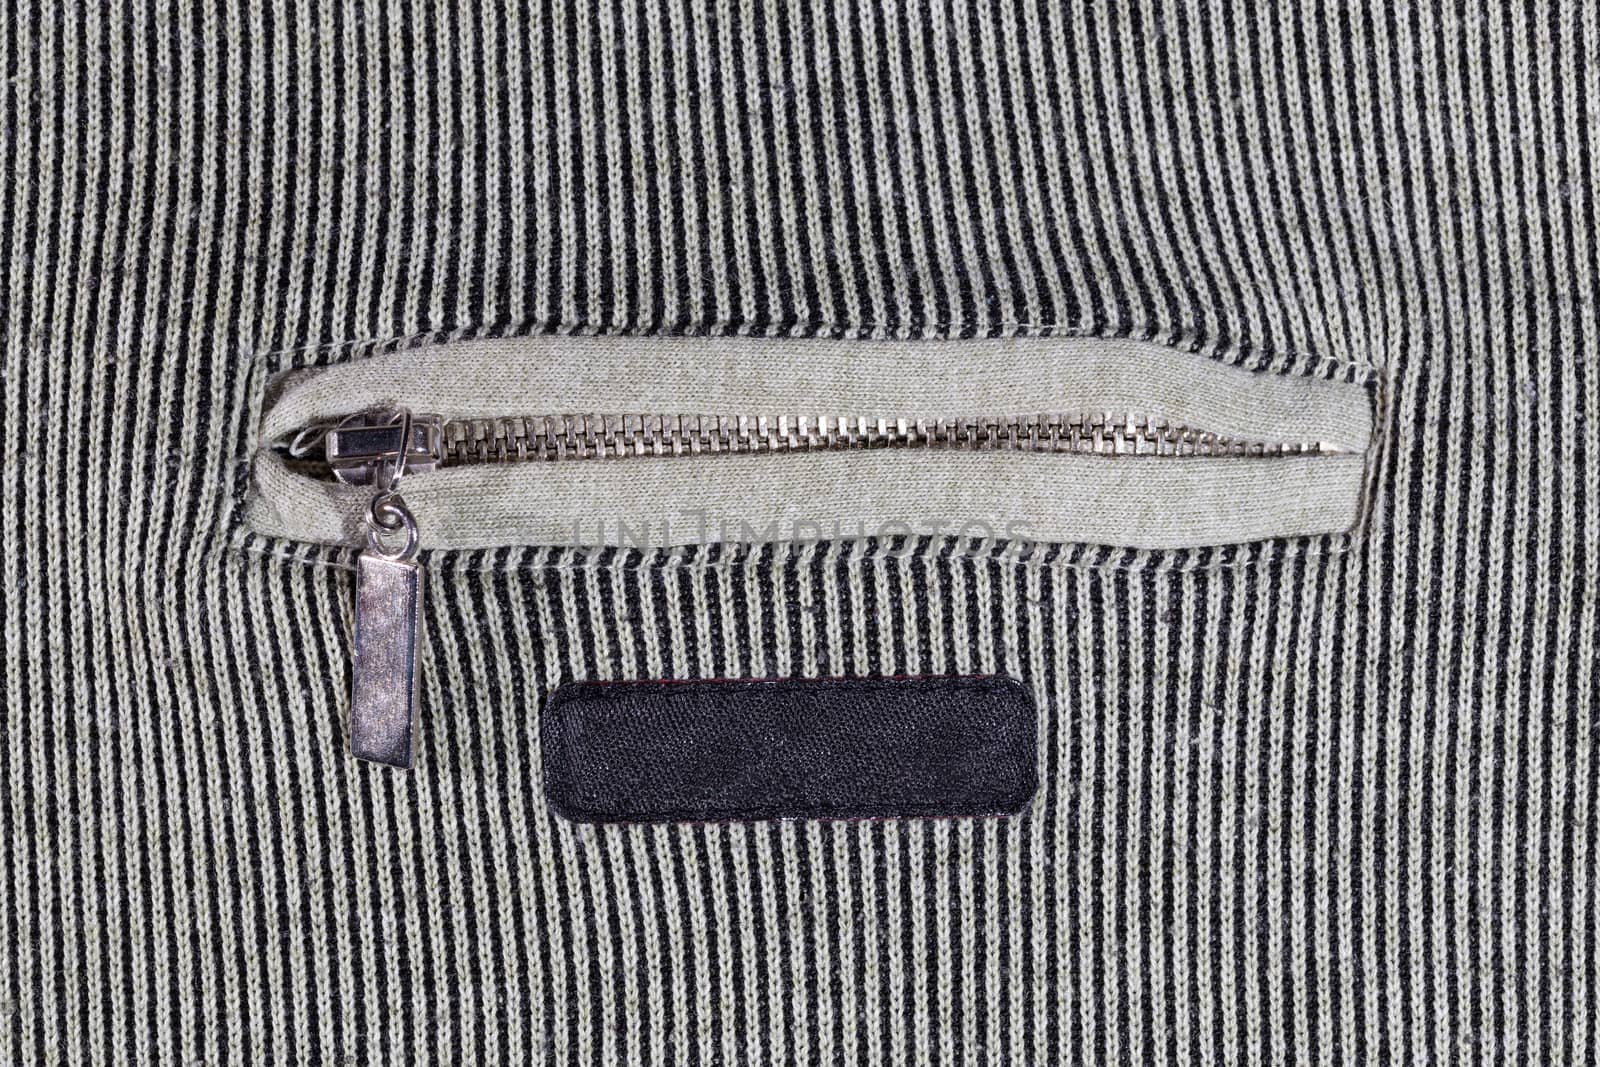 abstract vertical striped texture of flat fabric surface with zip locking chest pocket, and black blank label by z1b